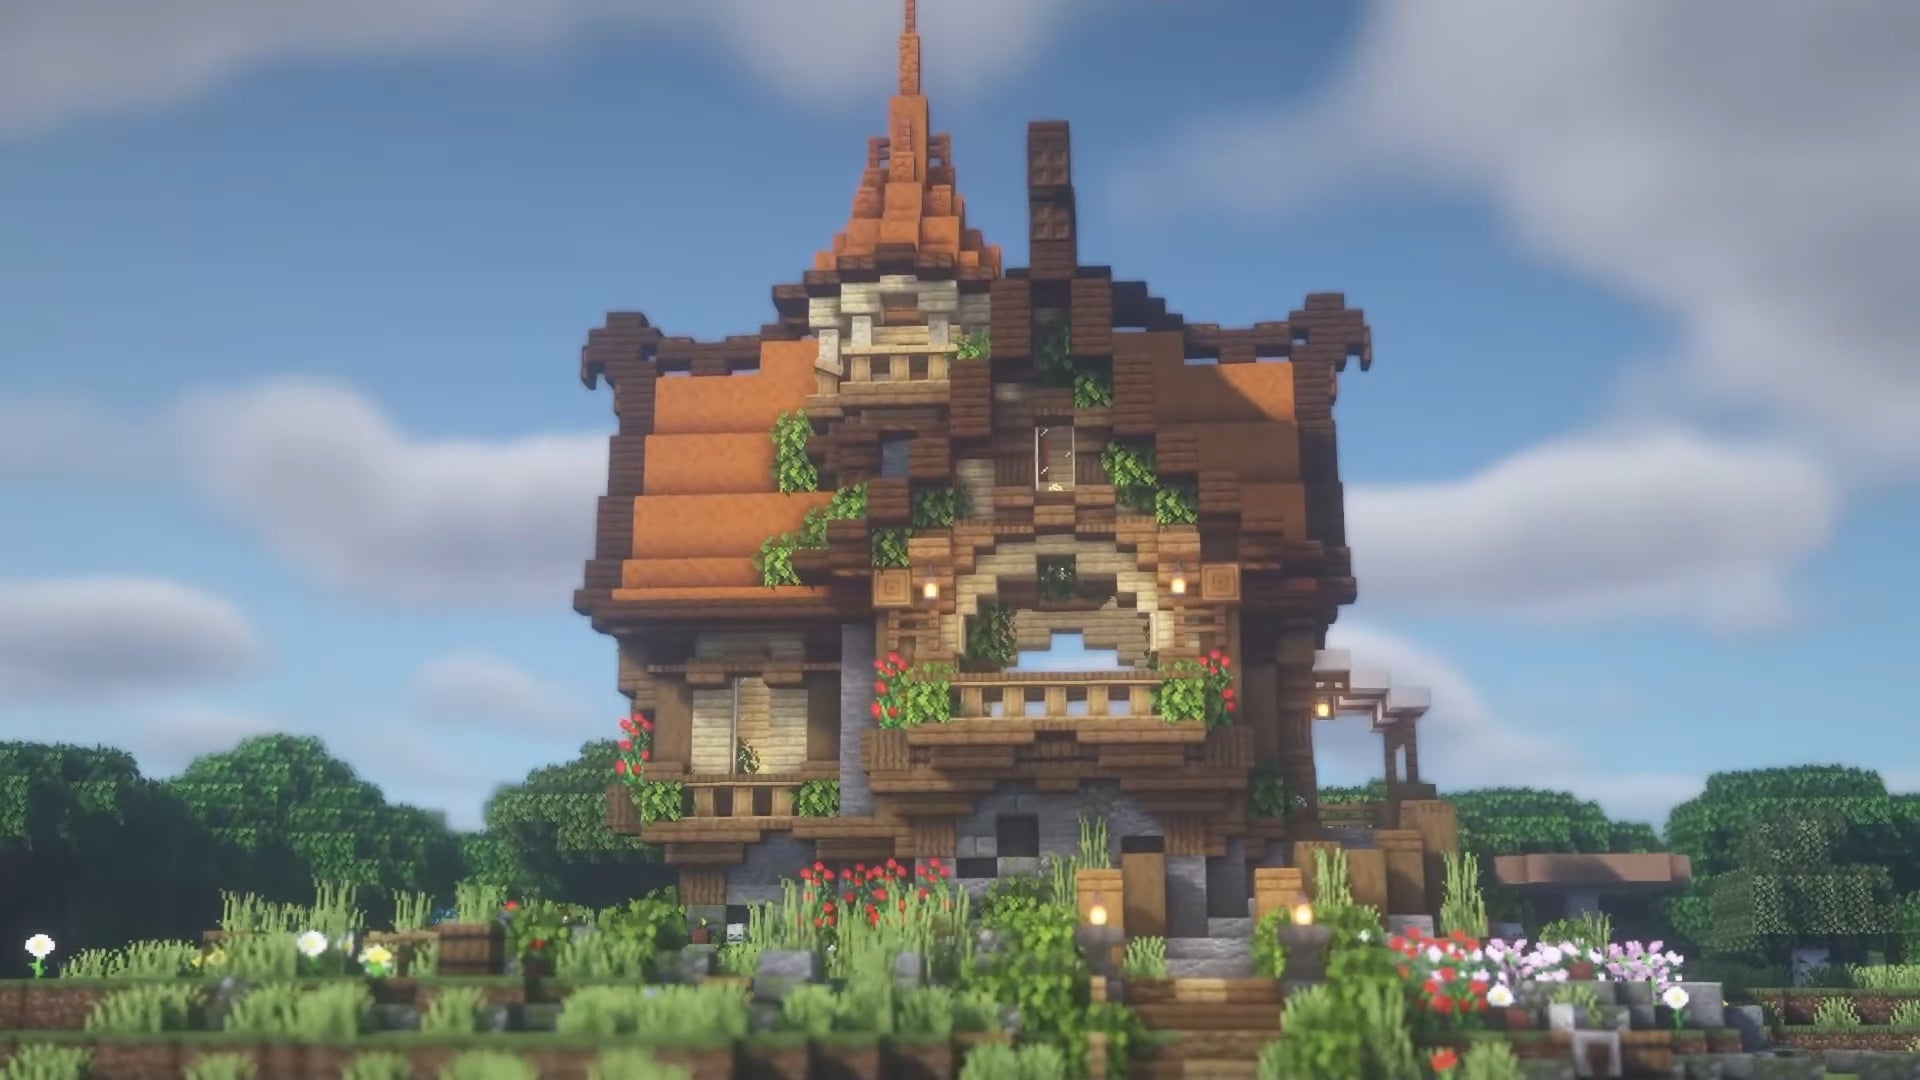 A fantasy house in Minecraft, built by YouTuber "Minecraft Fantasy Builds".